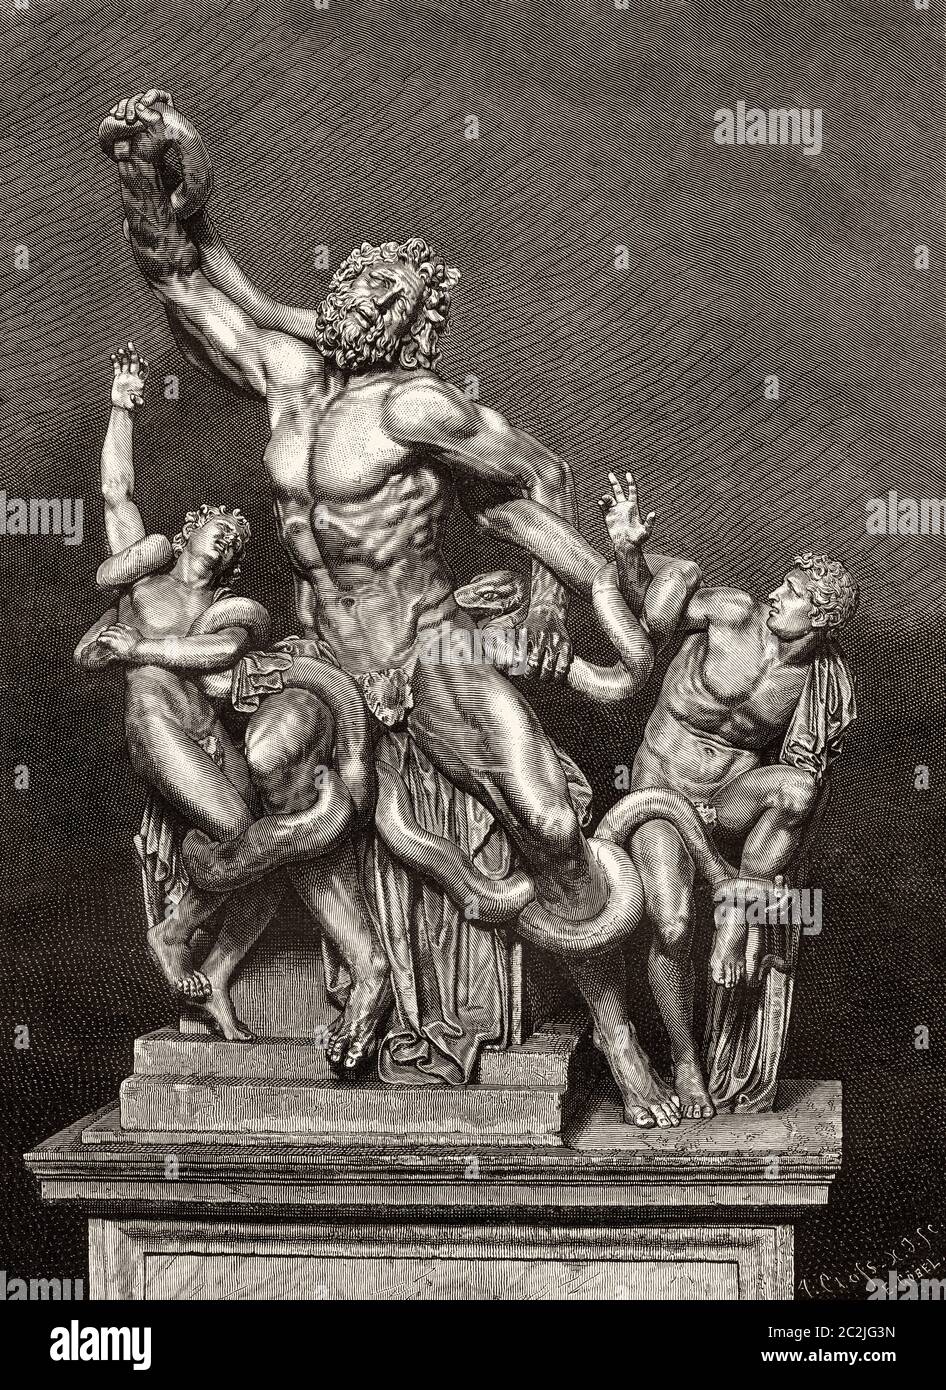 Laocoon and his Sons, attributed to sculptors Agesander, Athenodoros and Polydorus from Rhodes, Ancient Greece. Old 19th century engraved illustration, El Mundo Ilustrado 1880 Stock Photo